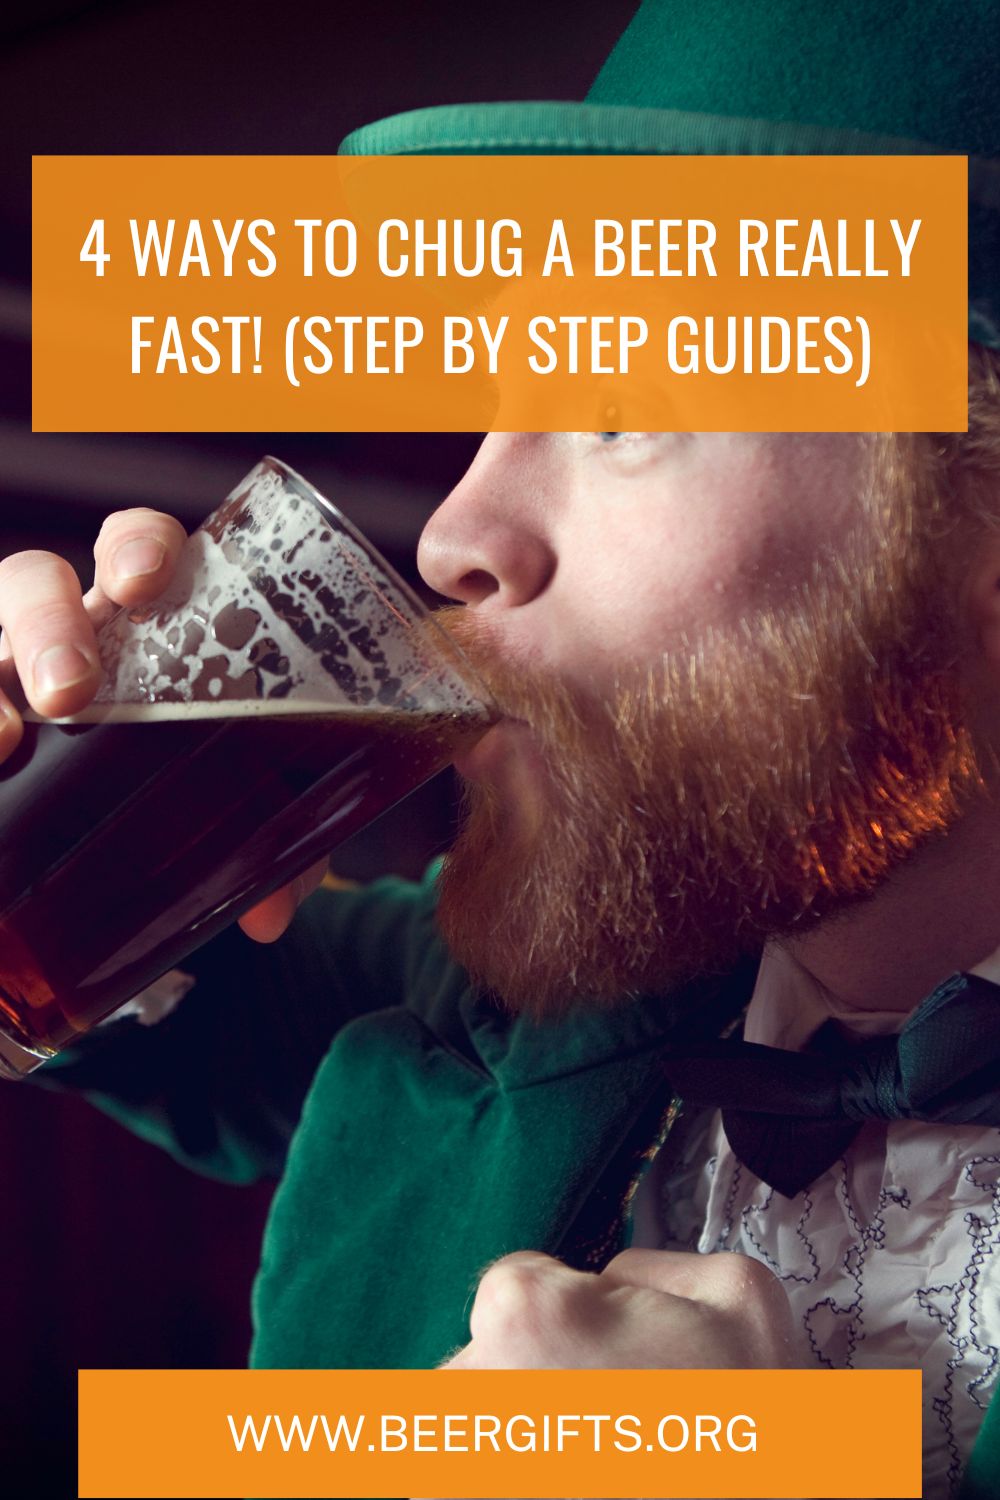 4 Ways to Chug a Beer Really Fast! (Step by Step Guides)5